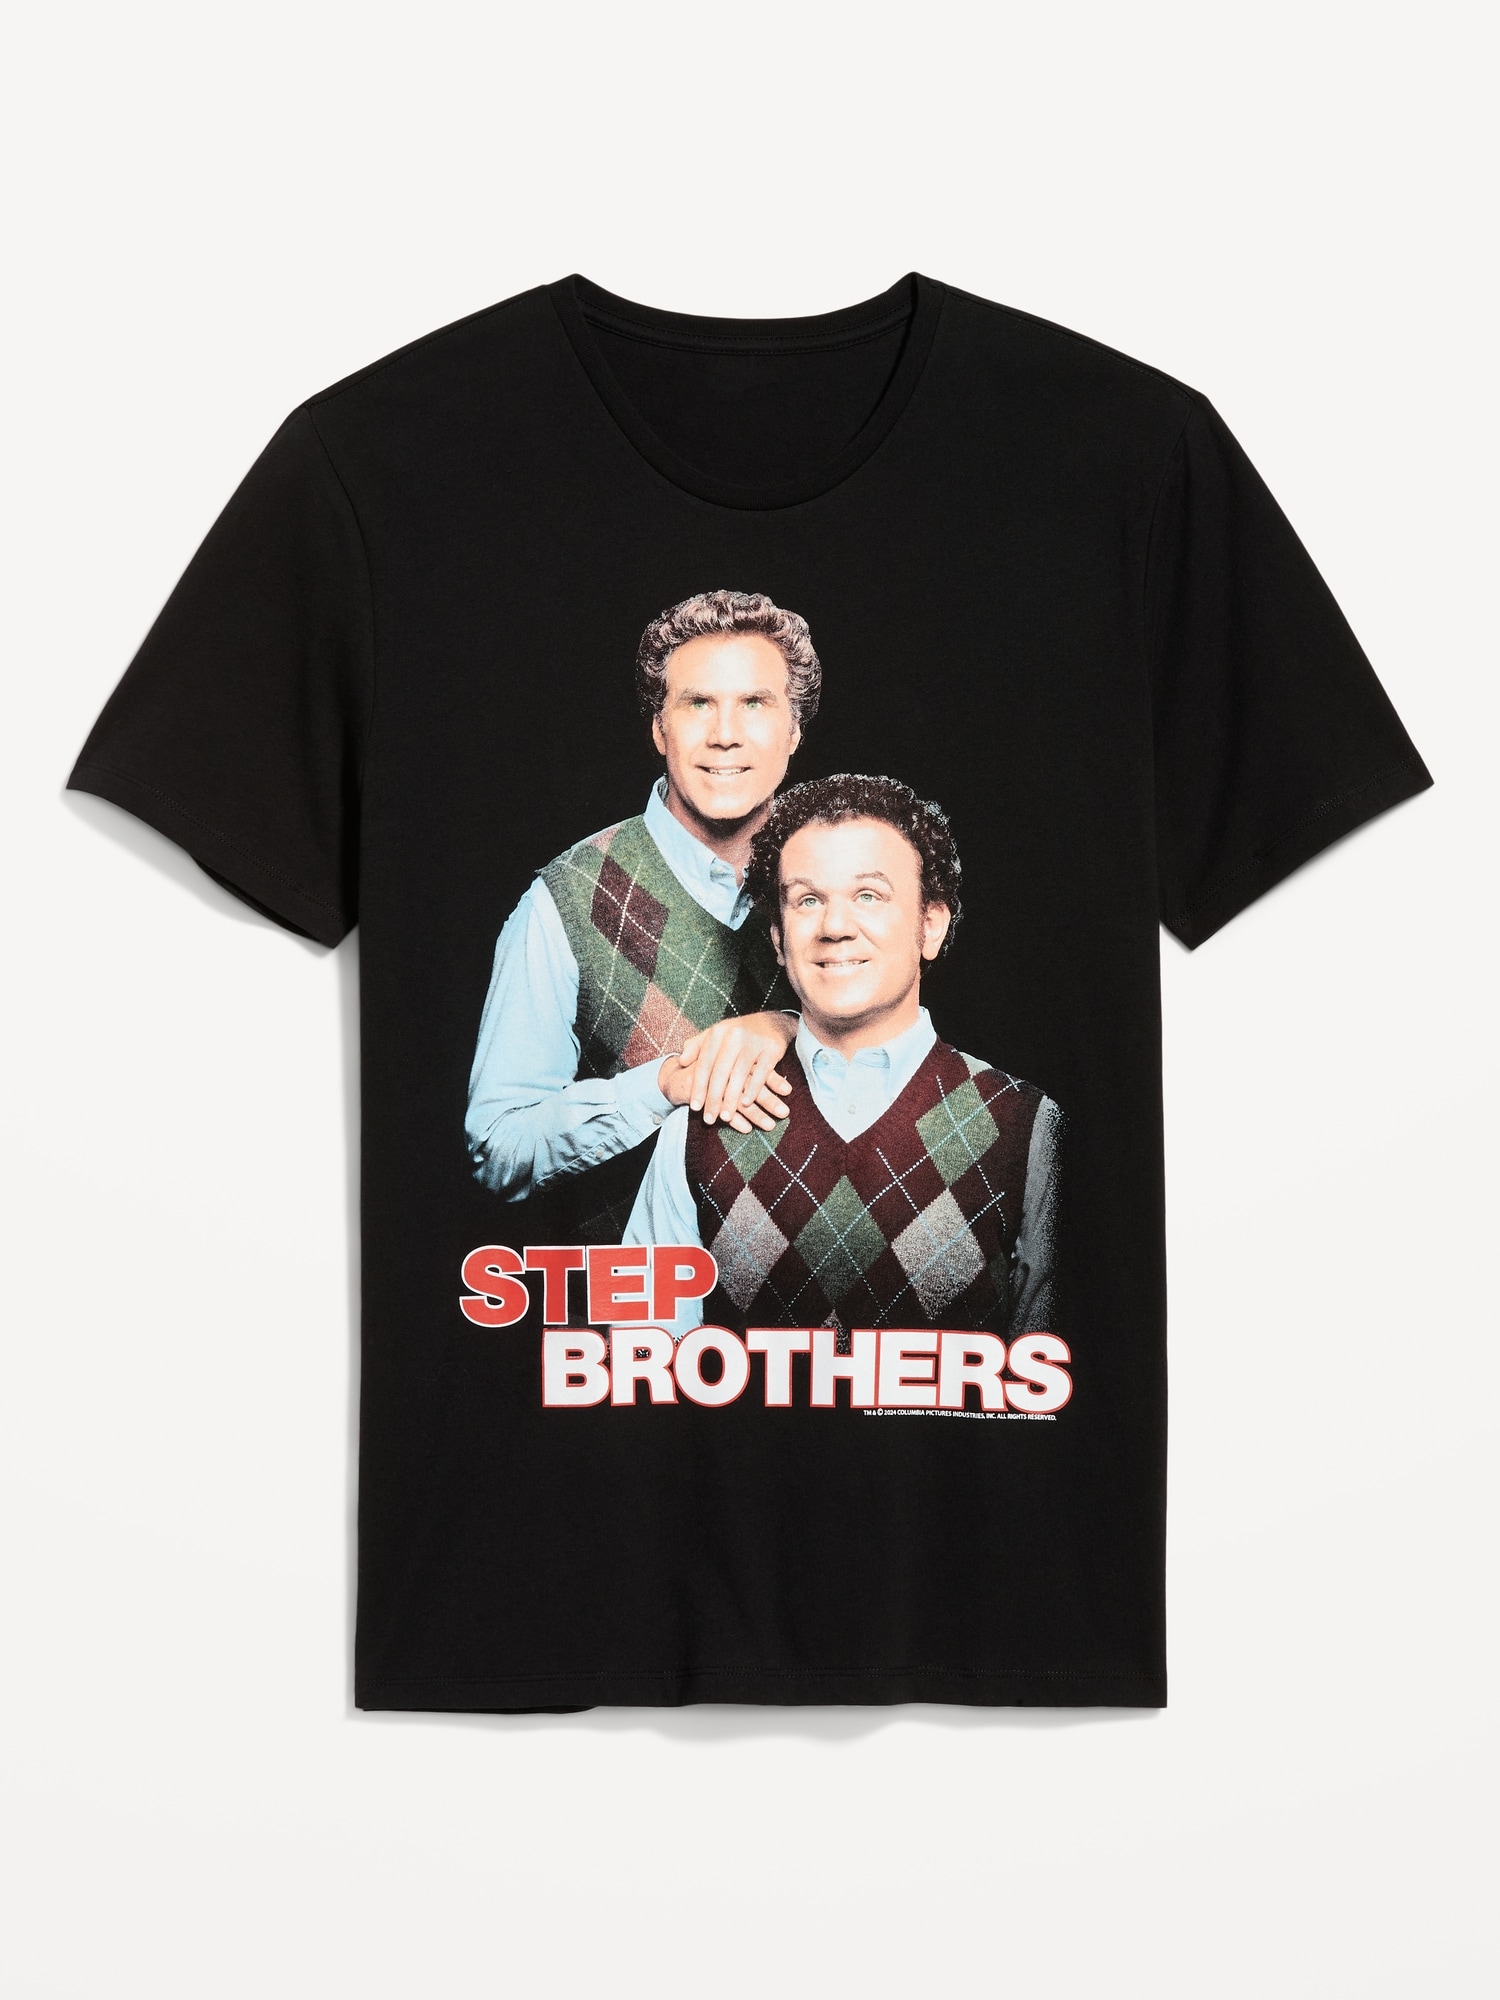 Step Brothers™ Gender-Neutral T-Shirt for Adults